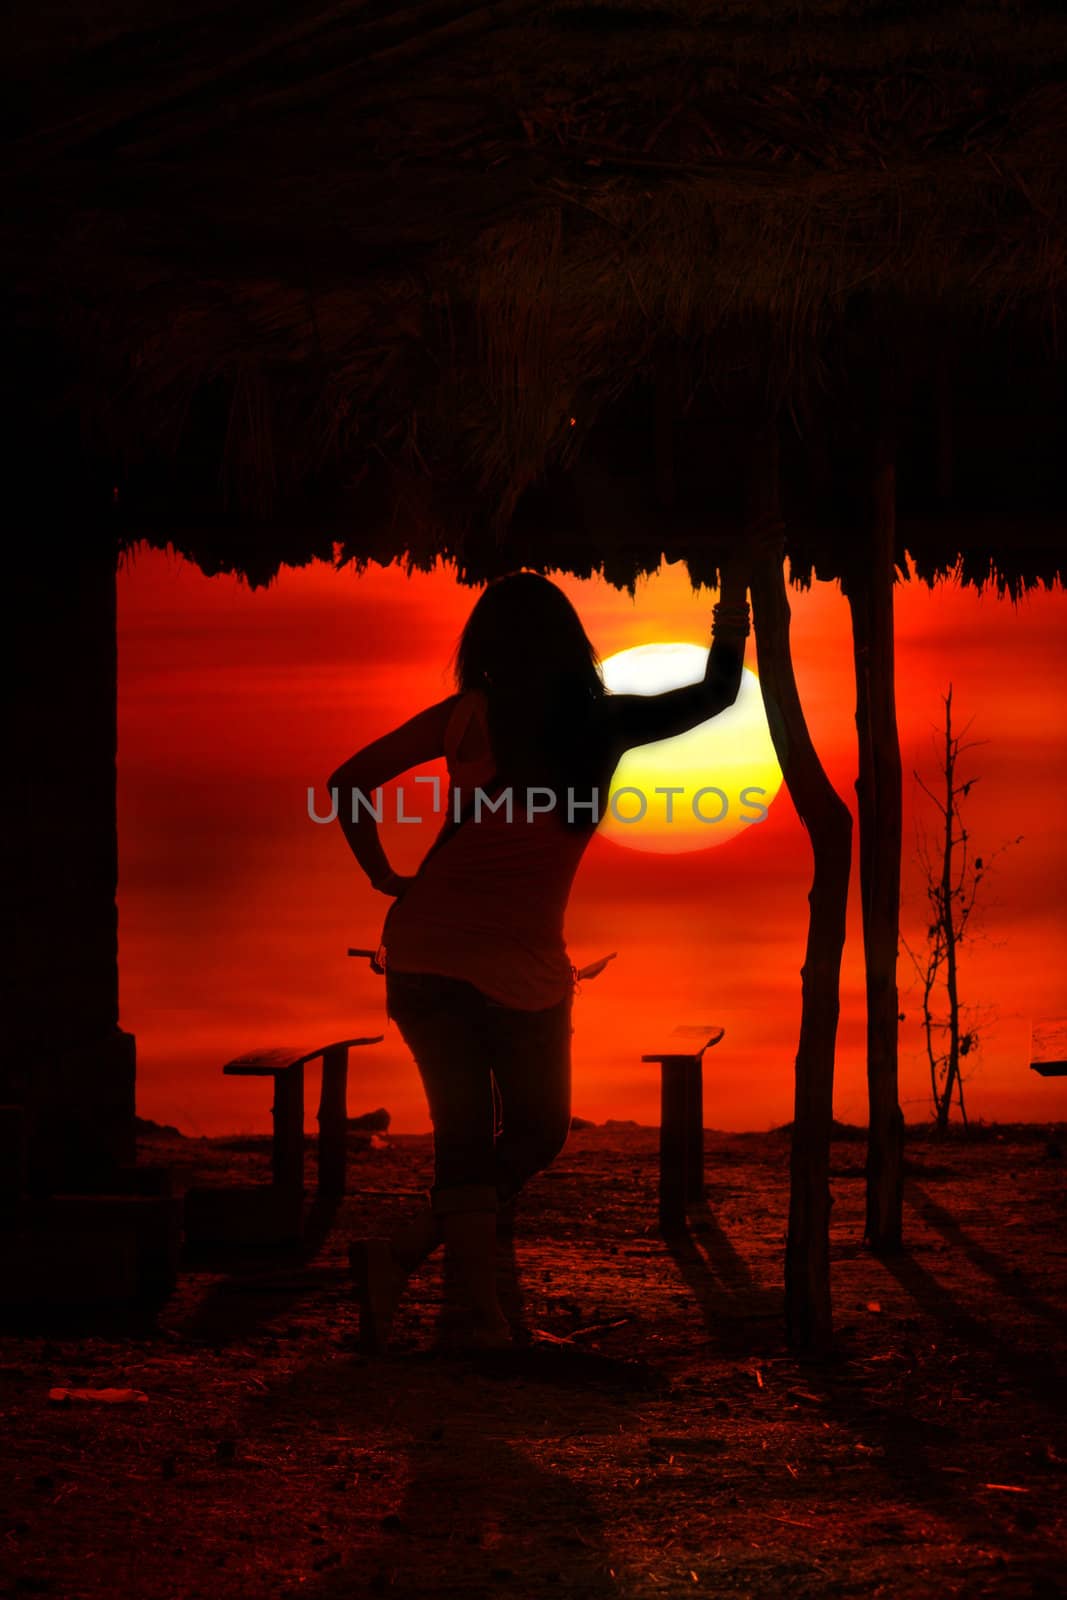 A woman watching a dark tropical sunset with a huge sun.